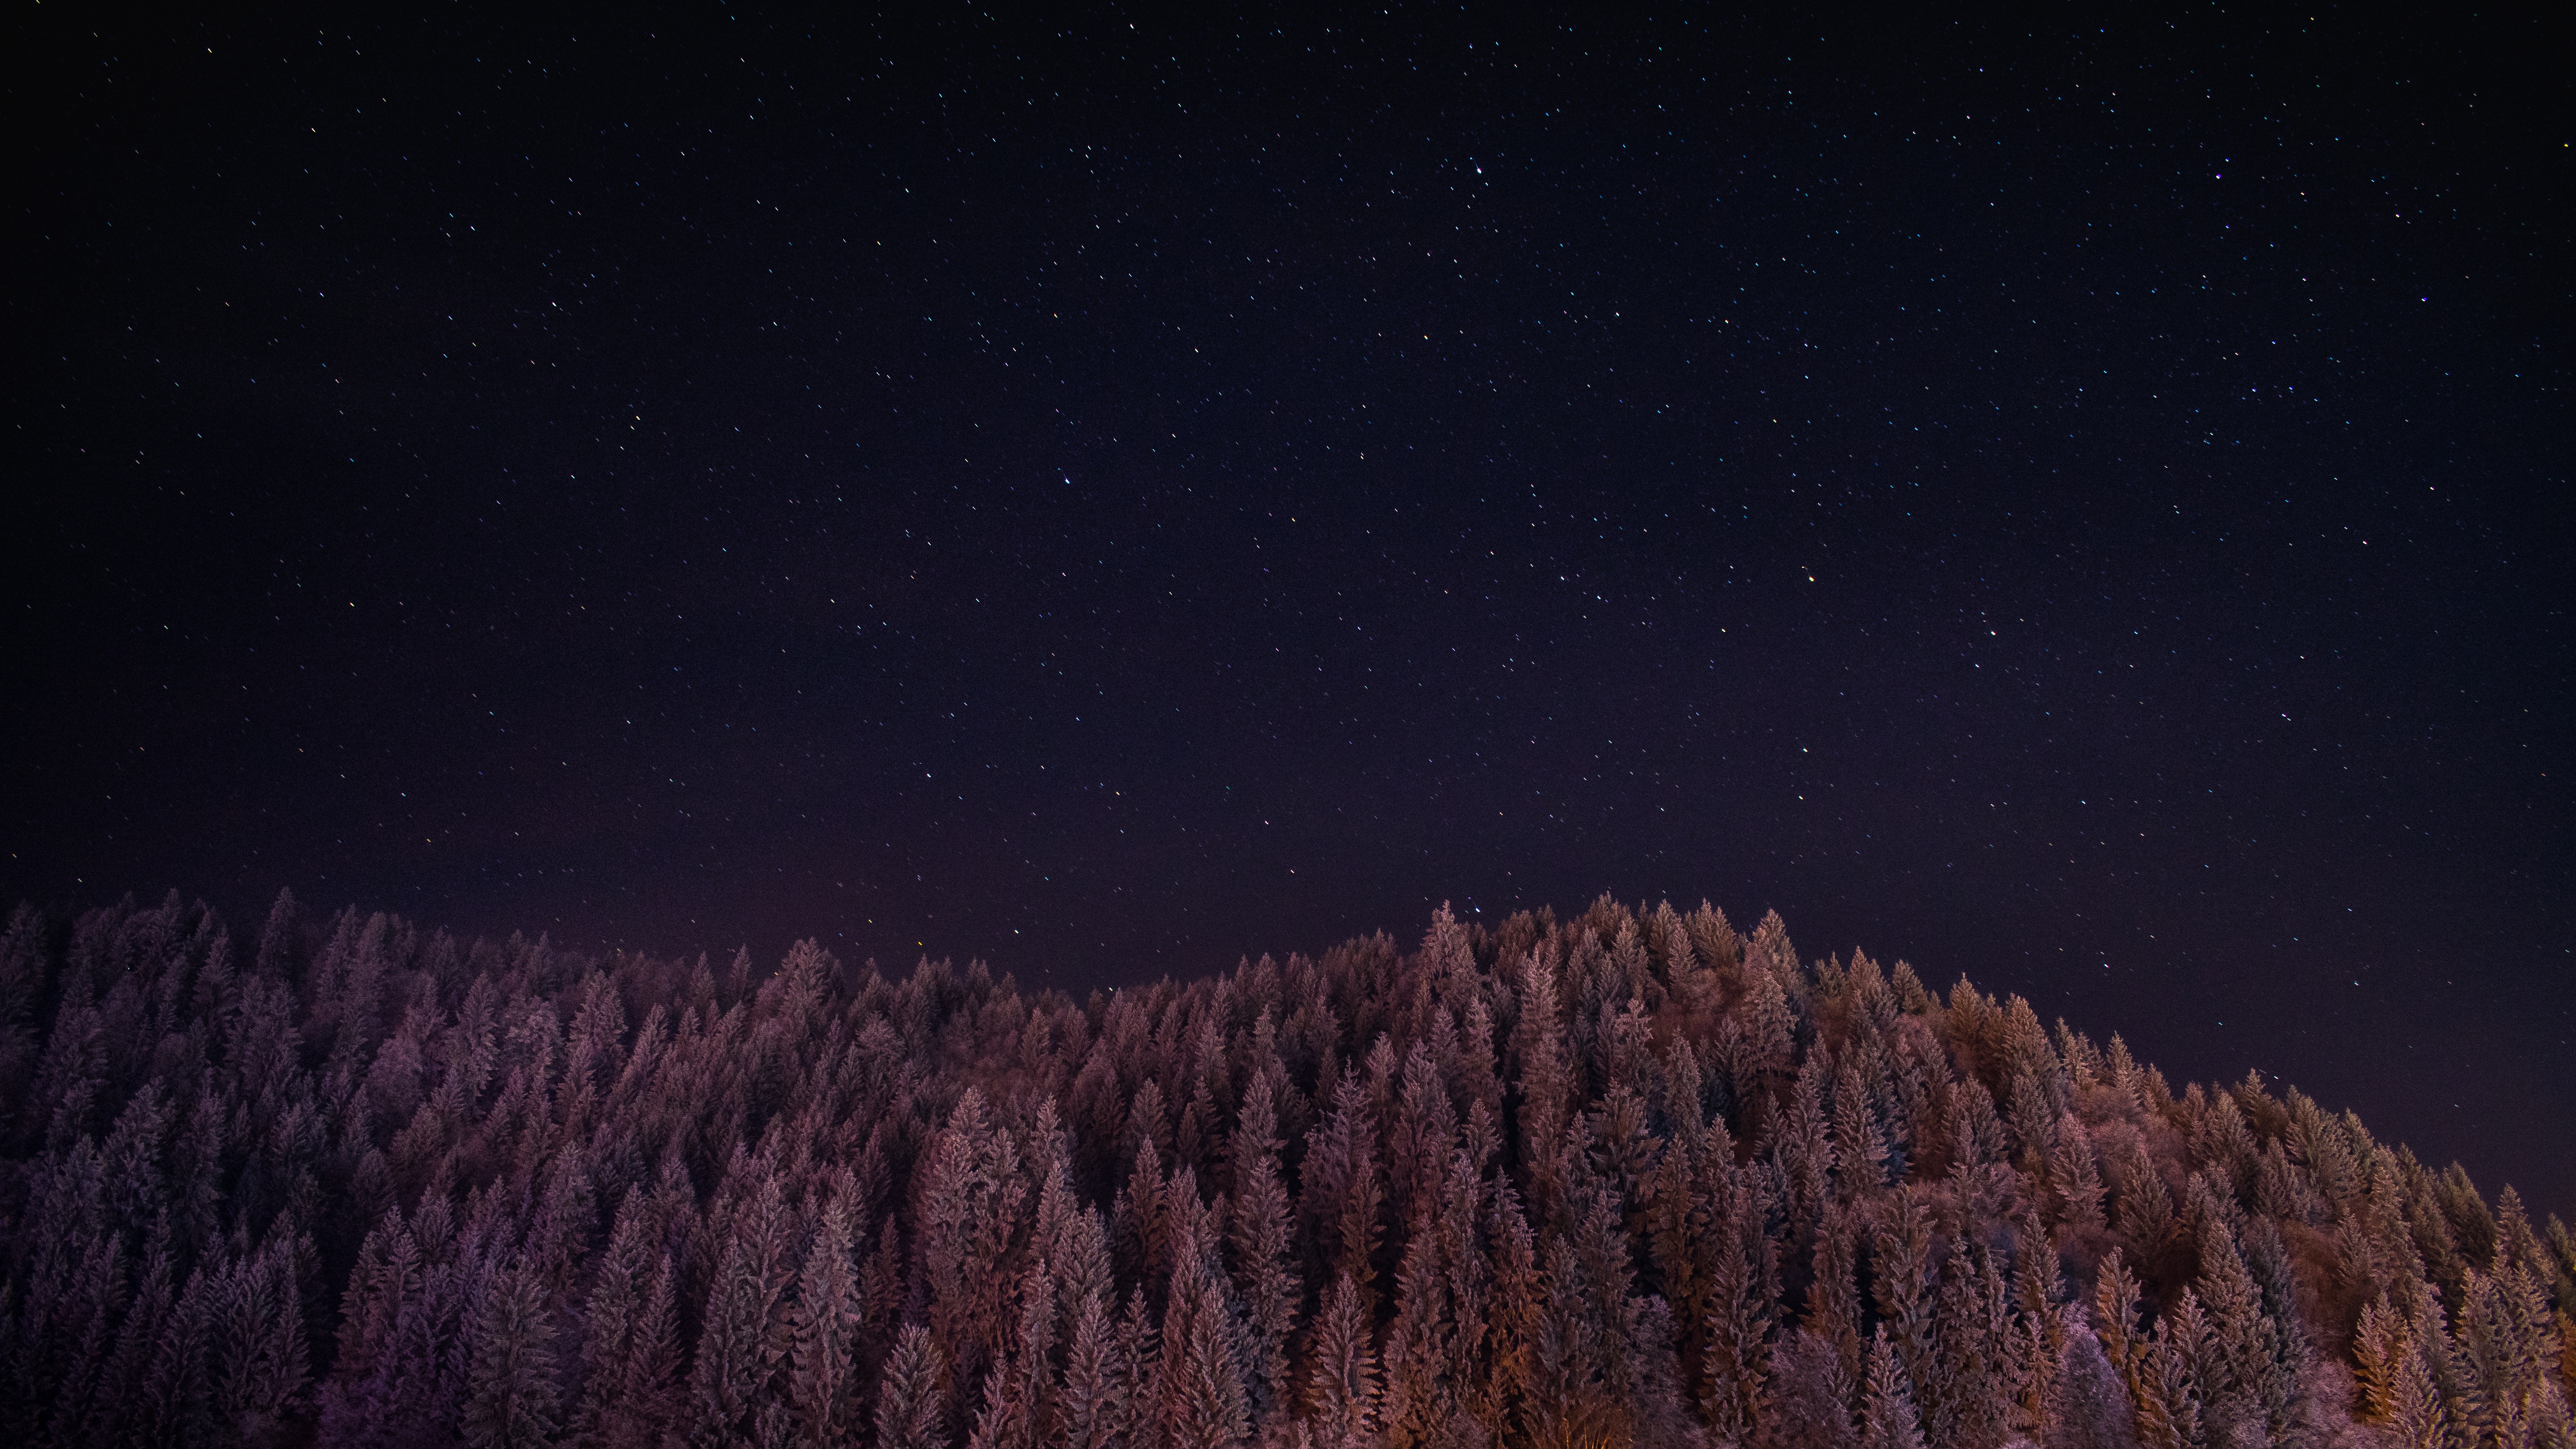 galaxy, Forest, Night, Landscape, Trees, Photography, Stars Wallpaper